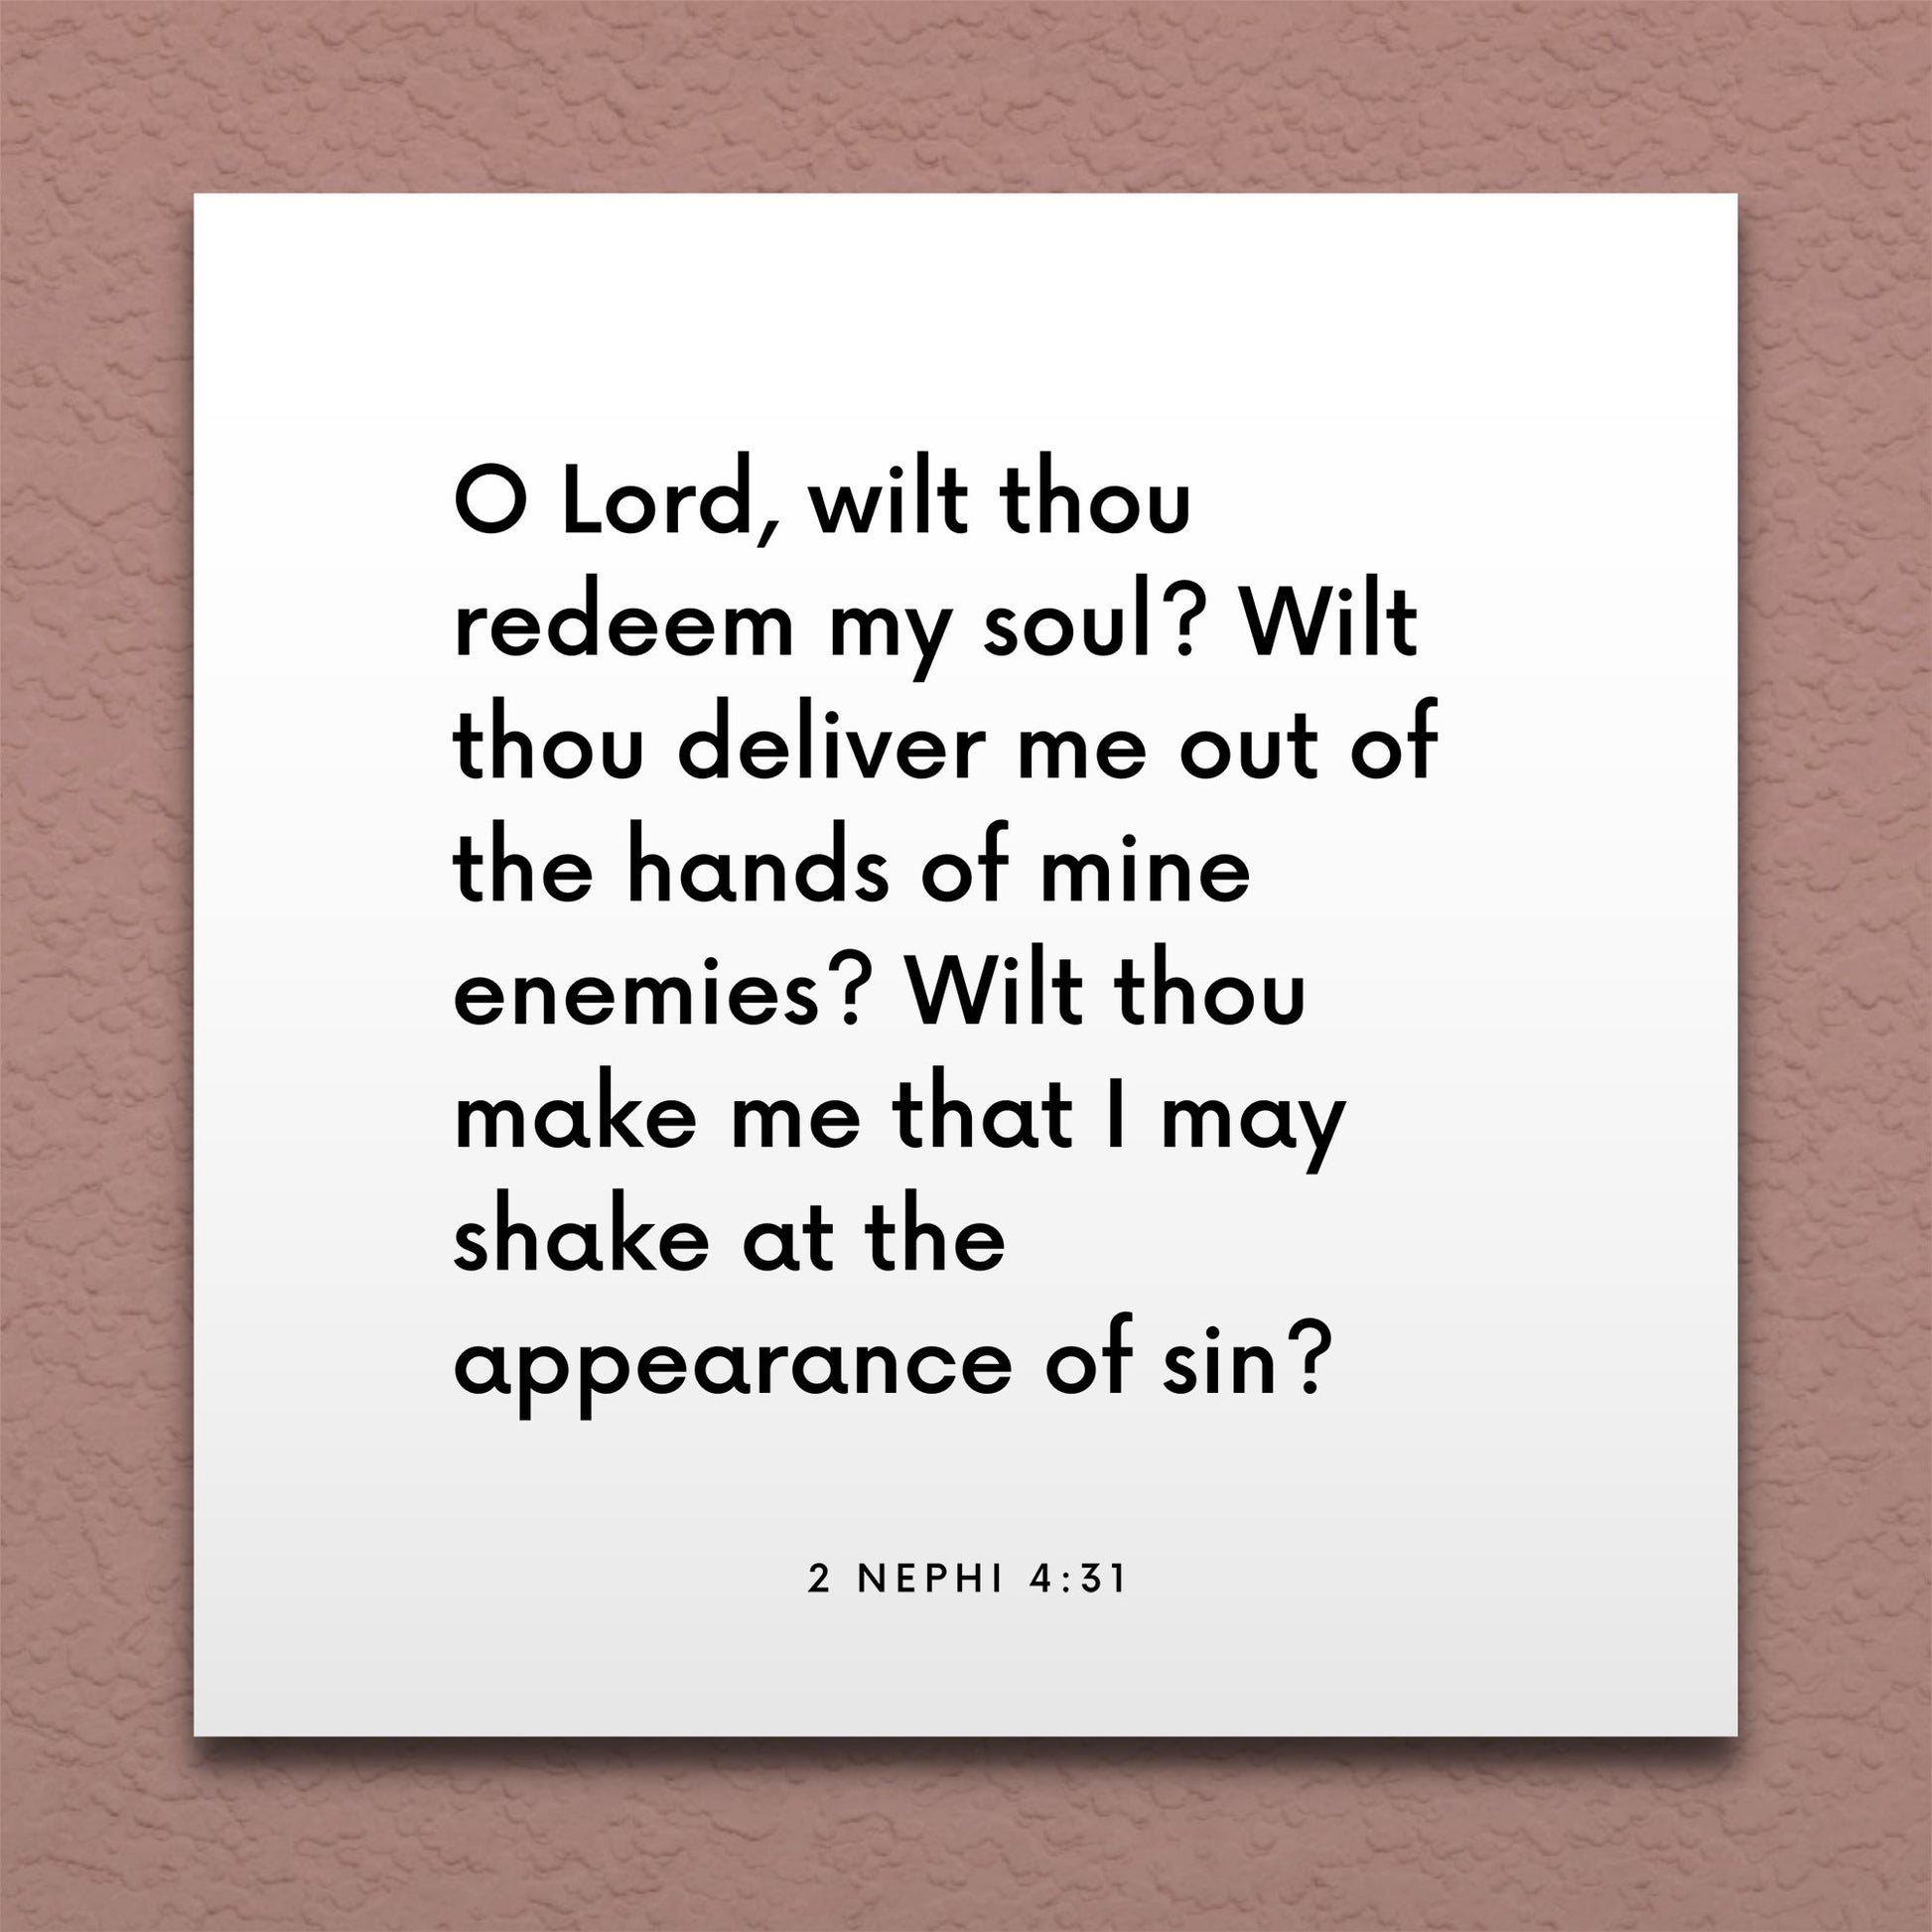 Wall-mounted scripture tile for 2 Nephi 4:31 - "Lord, wilt thou redeem my soul?"